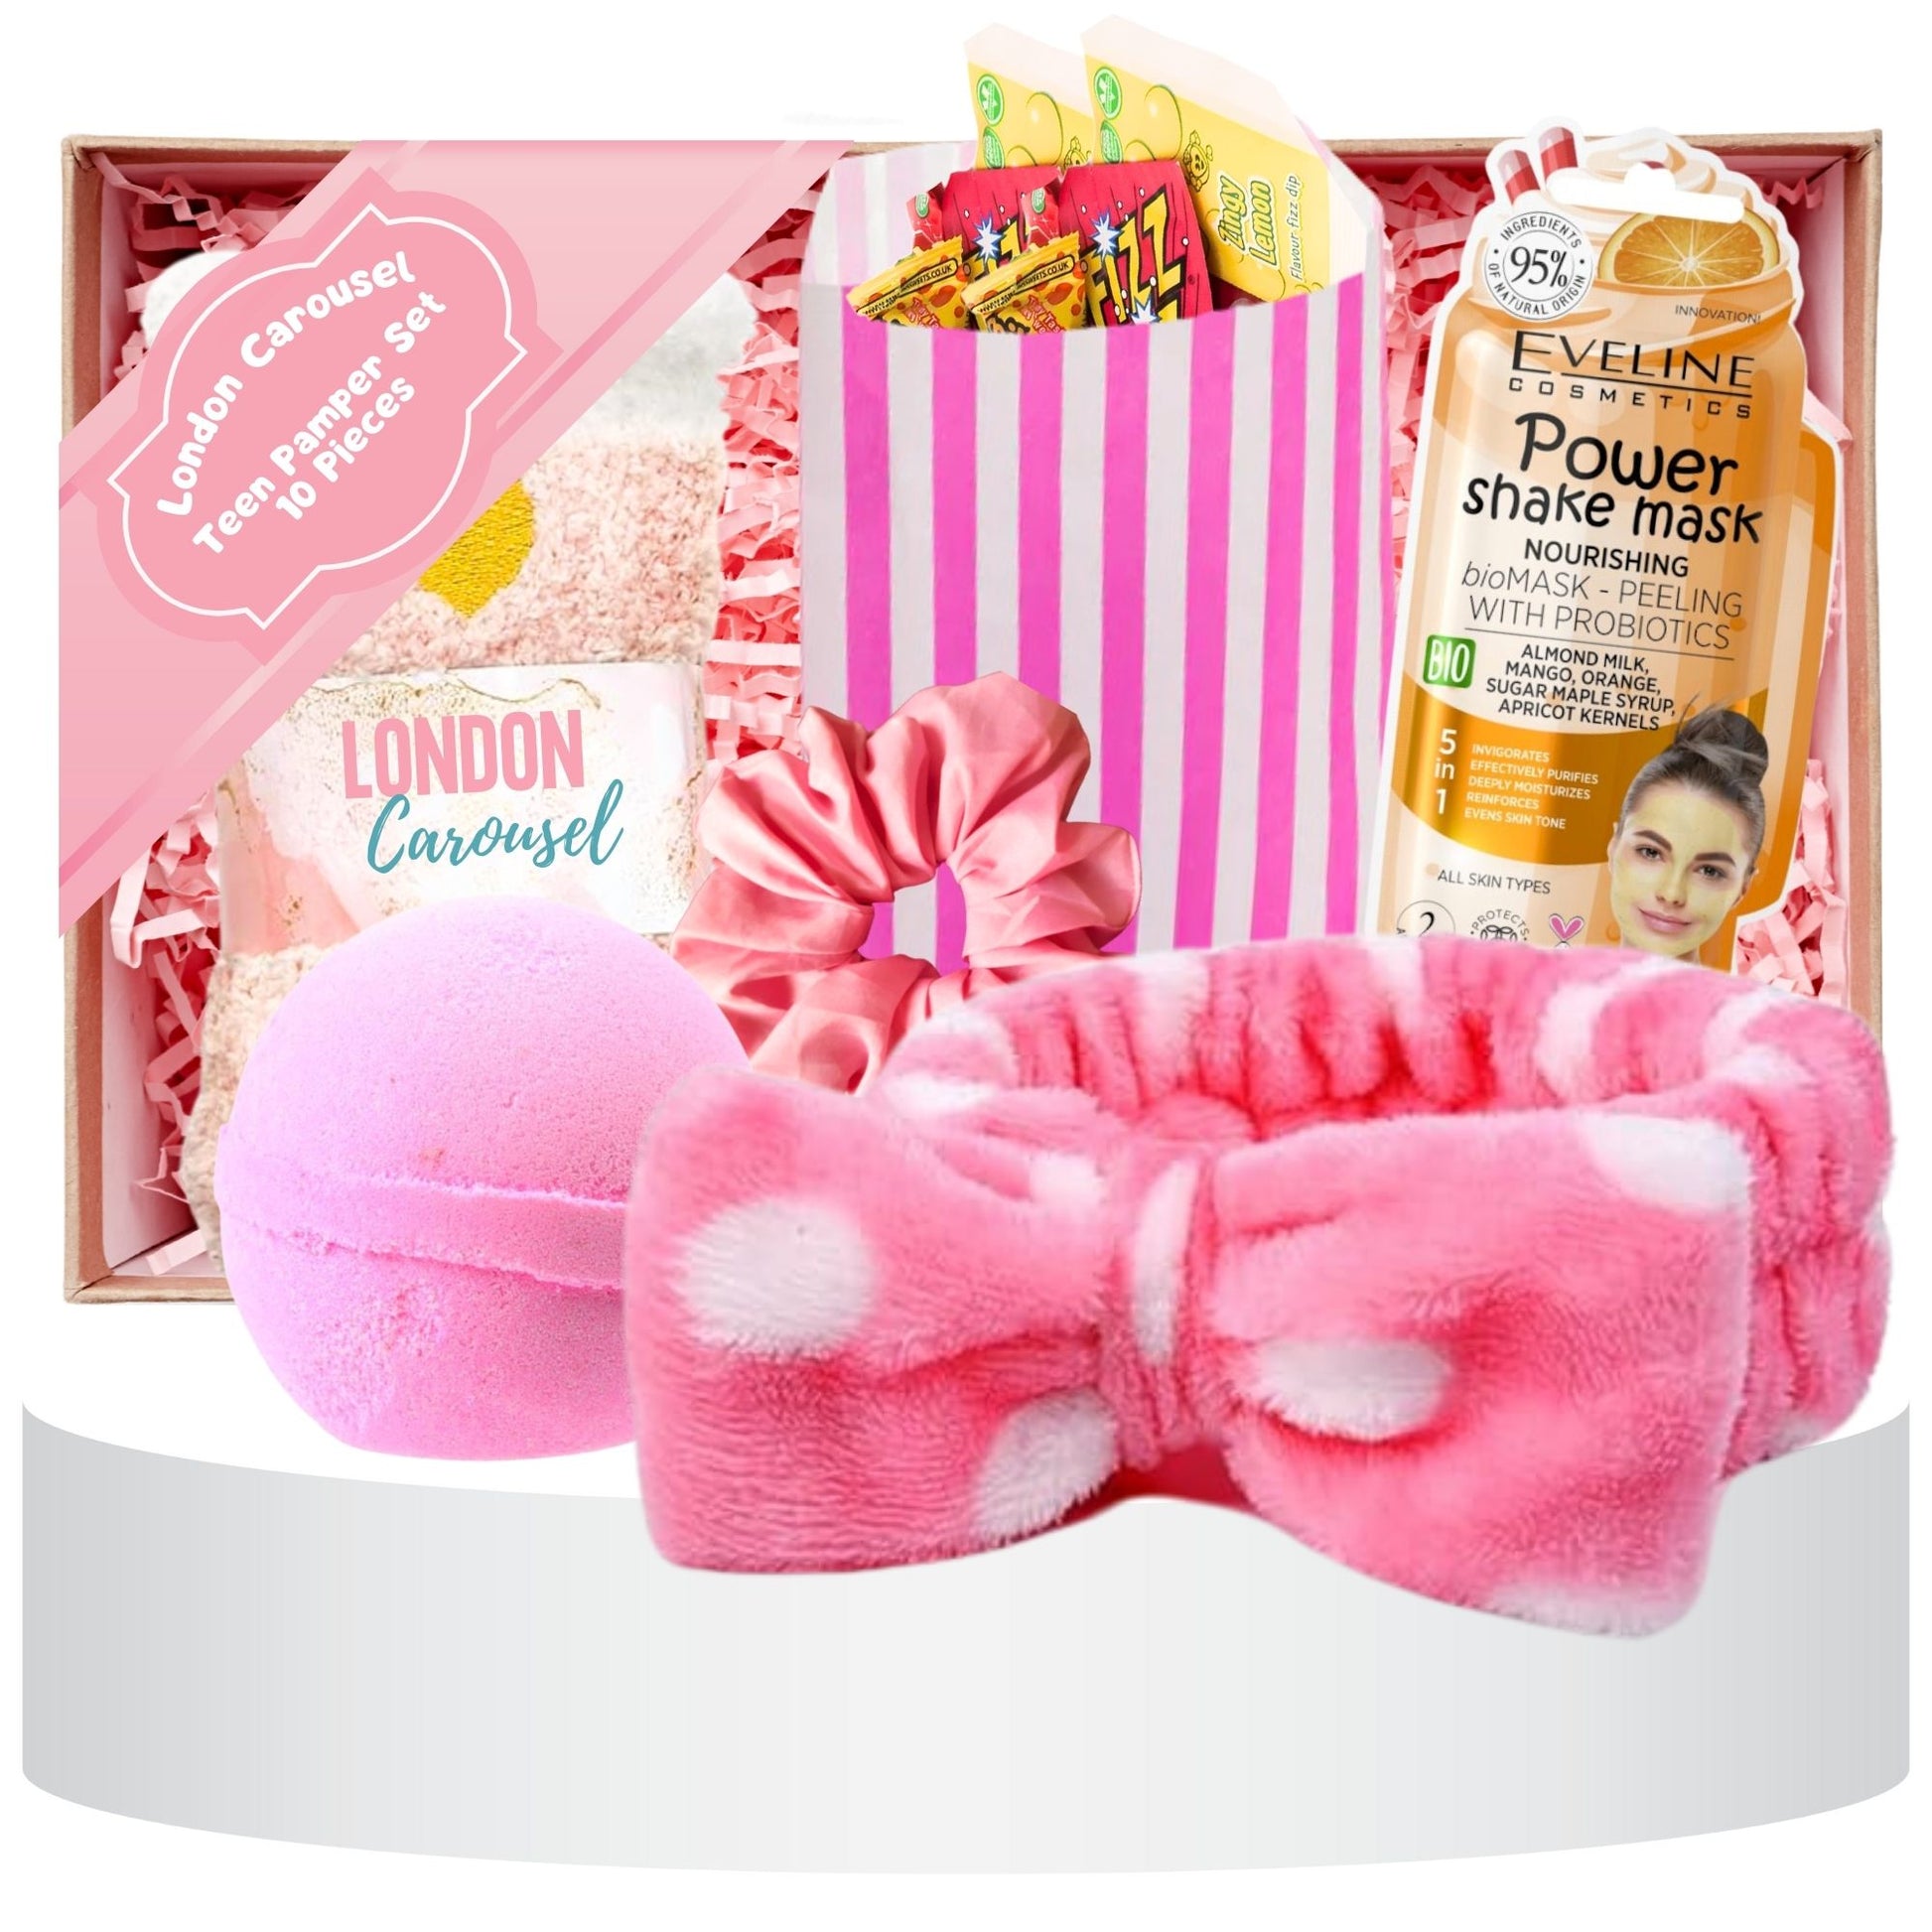 A delightful Pamper Me Pretty Hamper Gift featuring a soft skincare headband, a 7th Heaven peel-off face mask, bubble gum scent bath bombs, cozy socks, a hair scrunchie, and a bag of sweet treats.